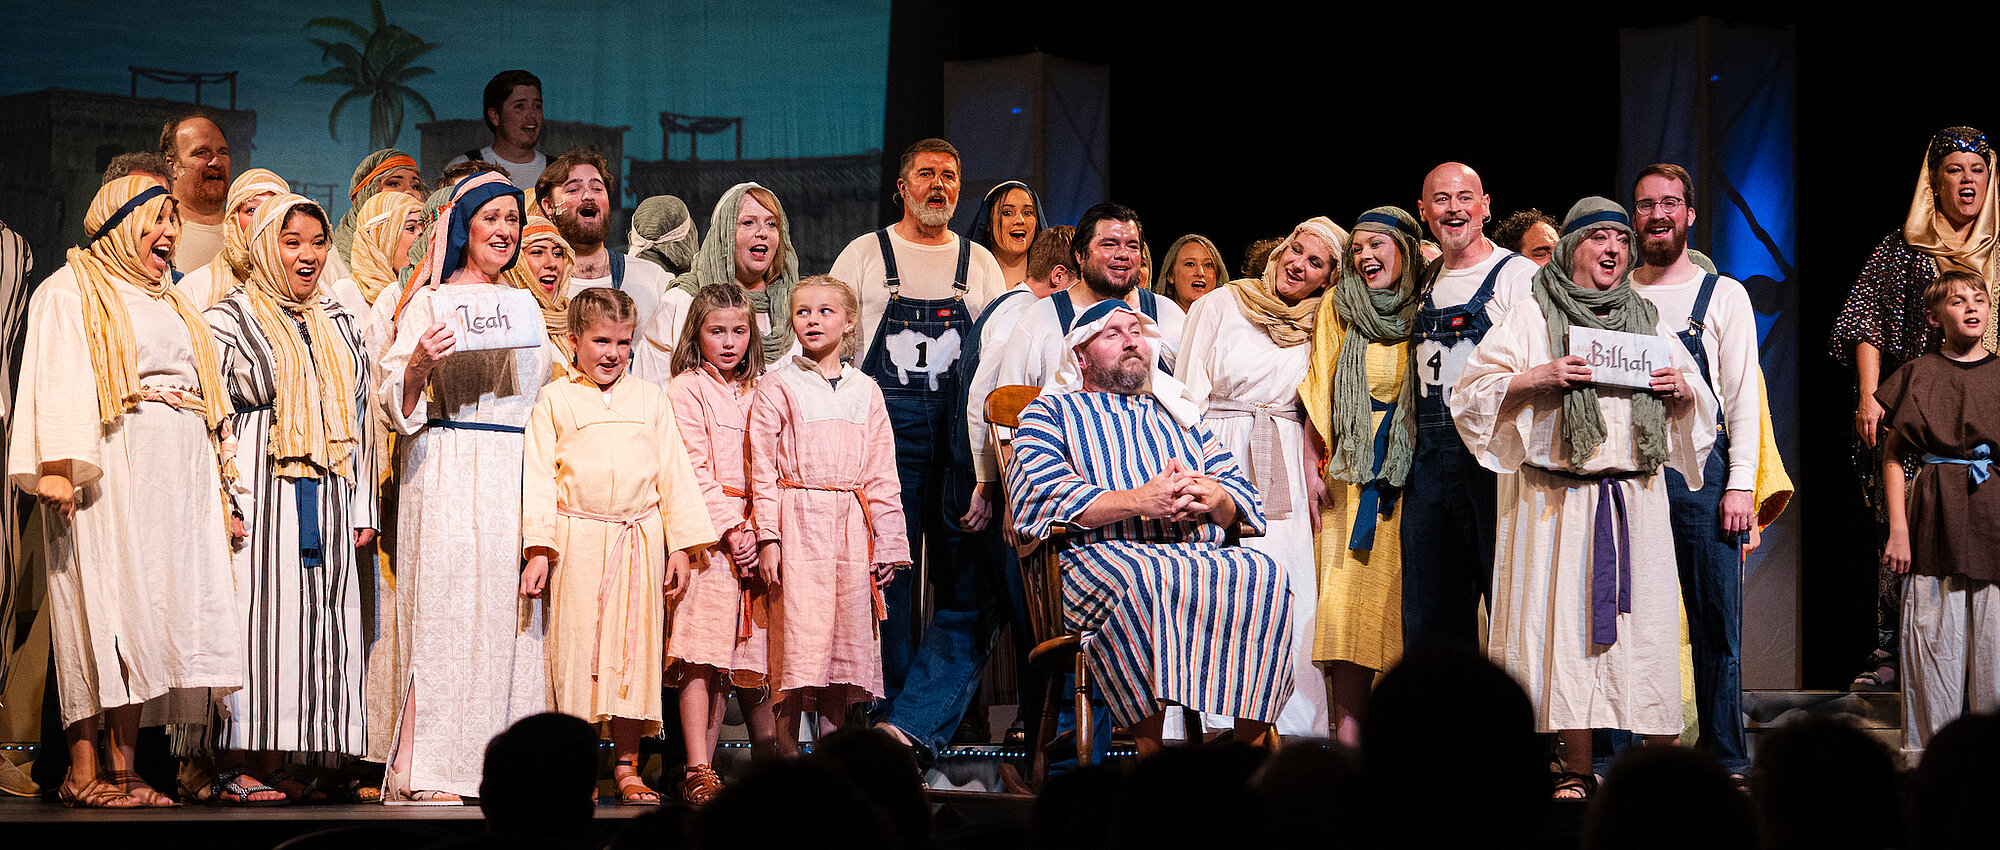 The whole cast of the summer musical play